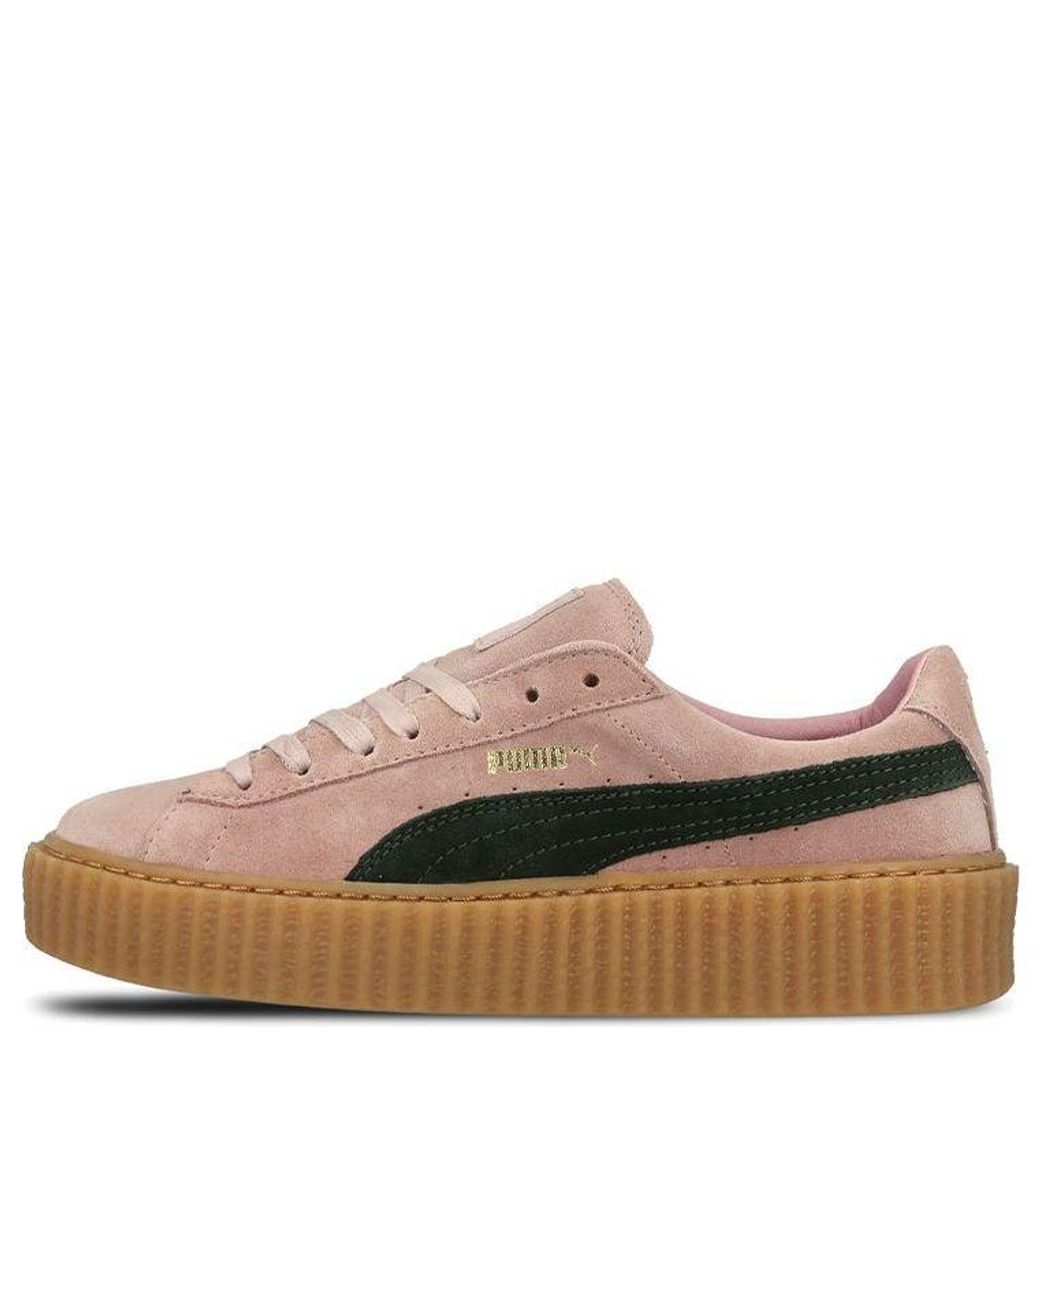 PUMA X Creepers Rihanna Black White Low-top Sneakers in Brown | Lyst